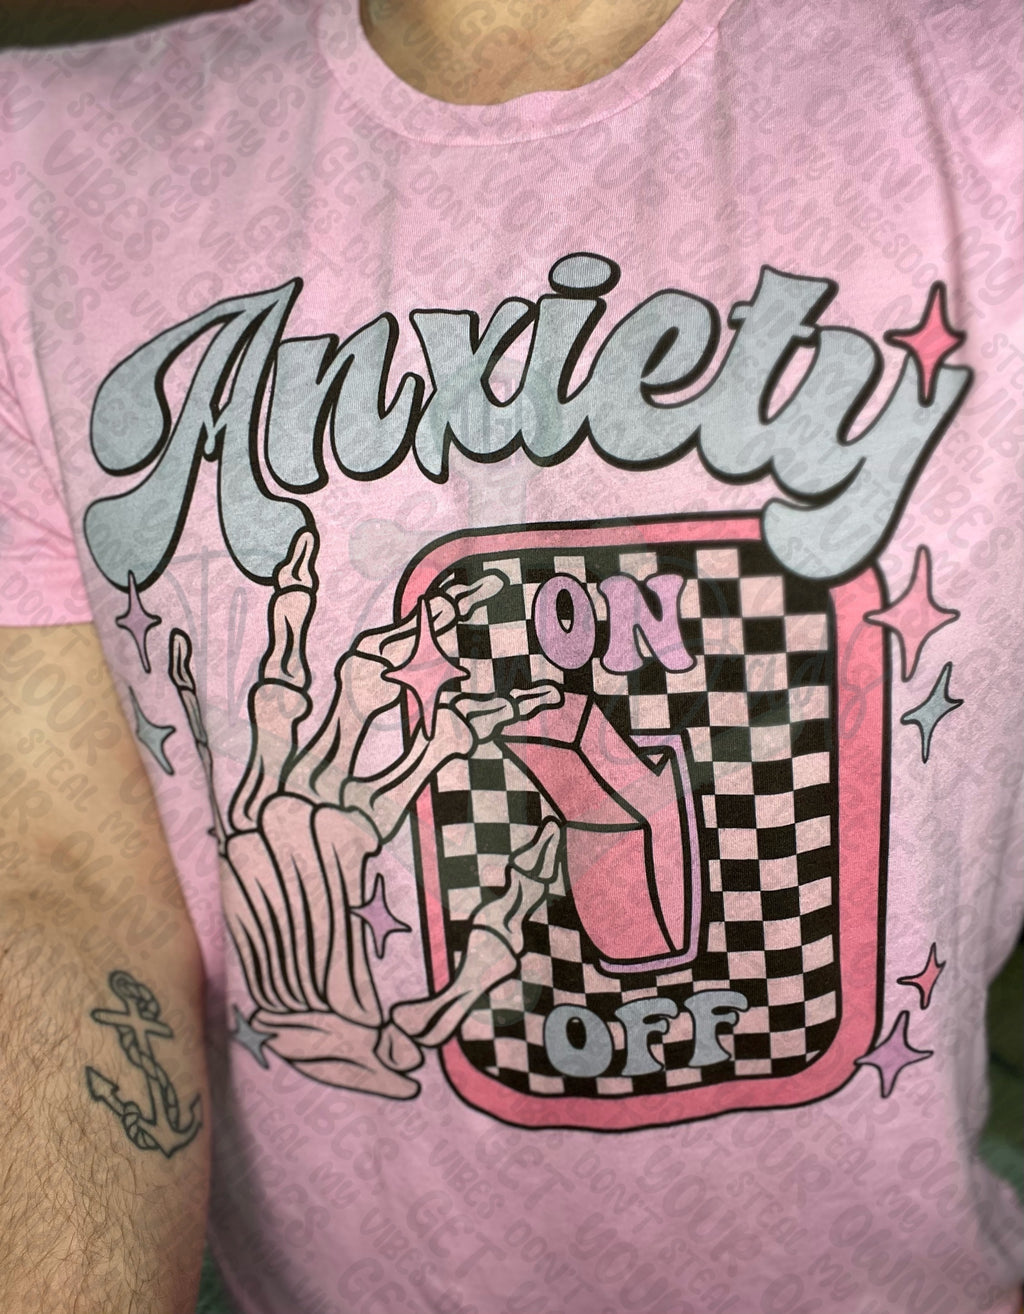 Anxiety On Checkered Top Design